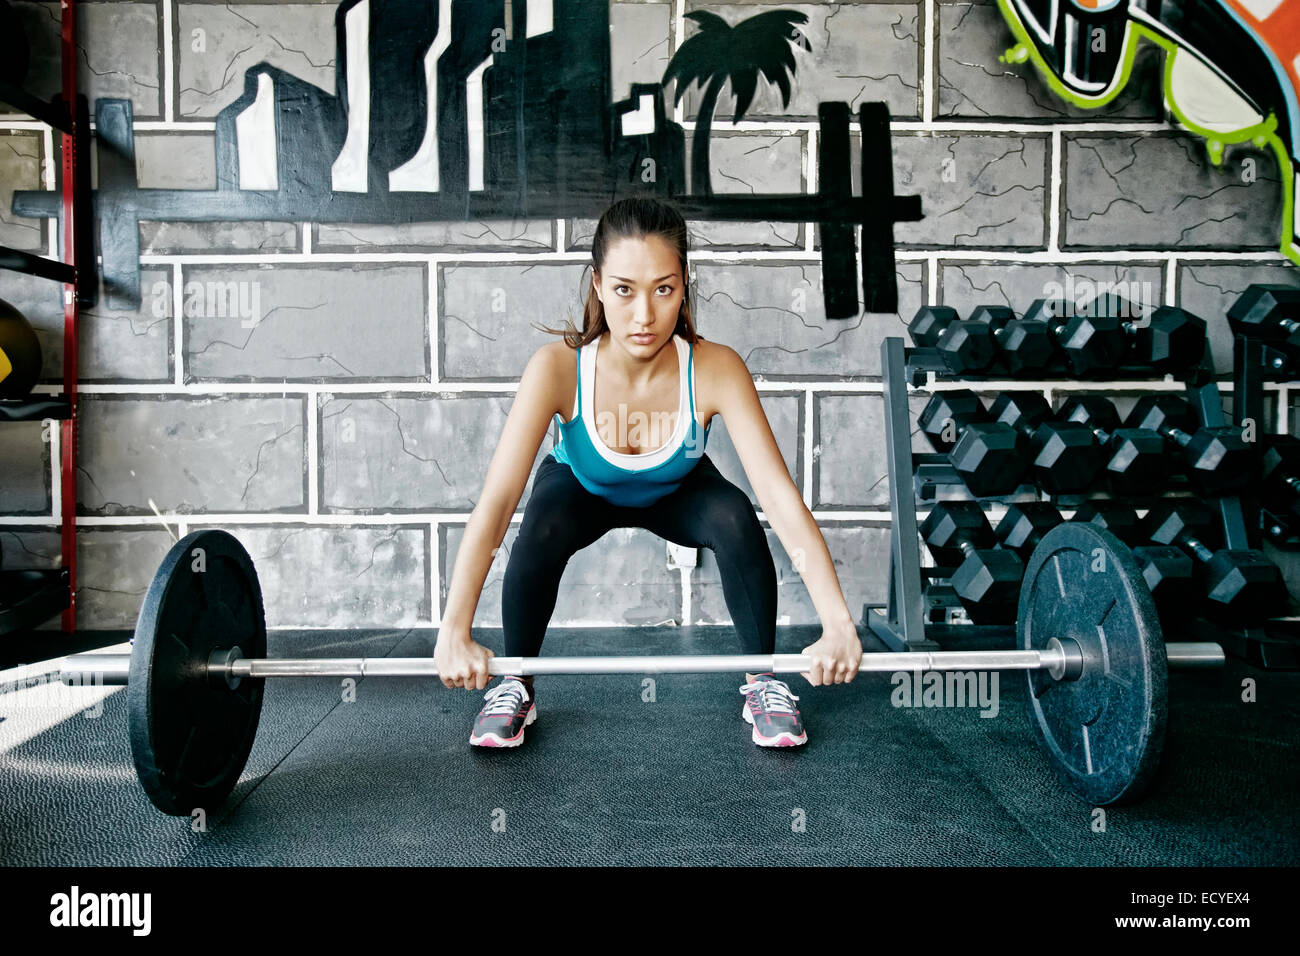 Mixed race woman lifting weights in gym Stock Photo